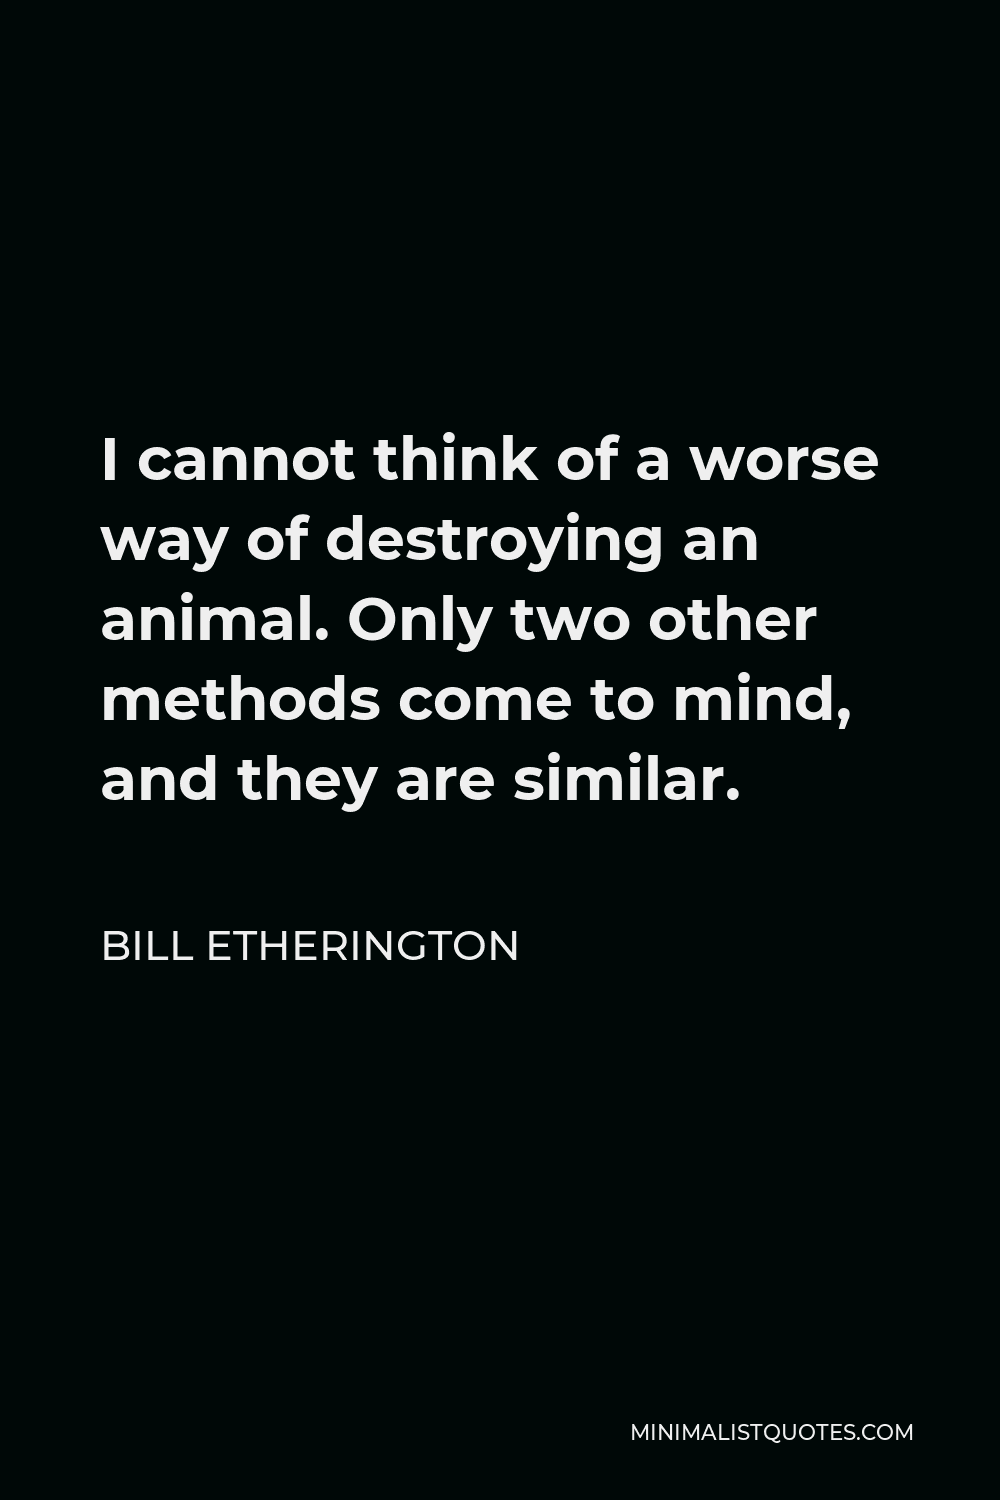 Bill Etherington Quote - I cannot think of a worse way of destroying an animal. Only two other methods come to mind, and they are similar.